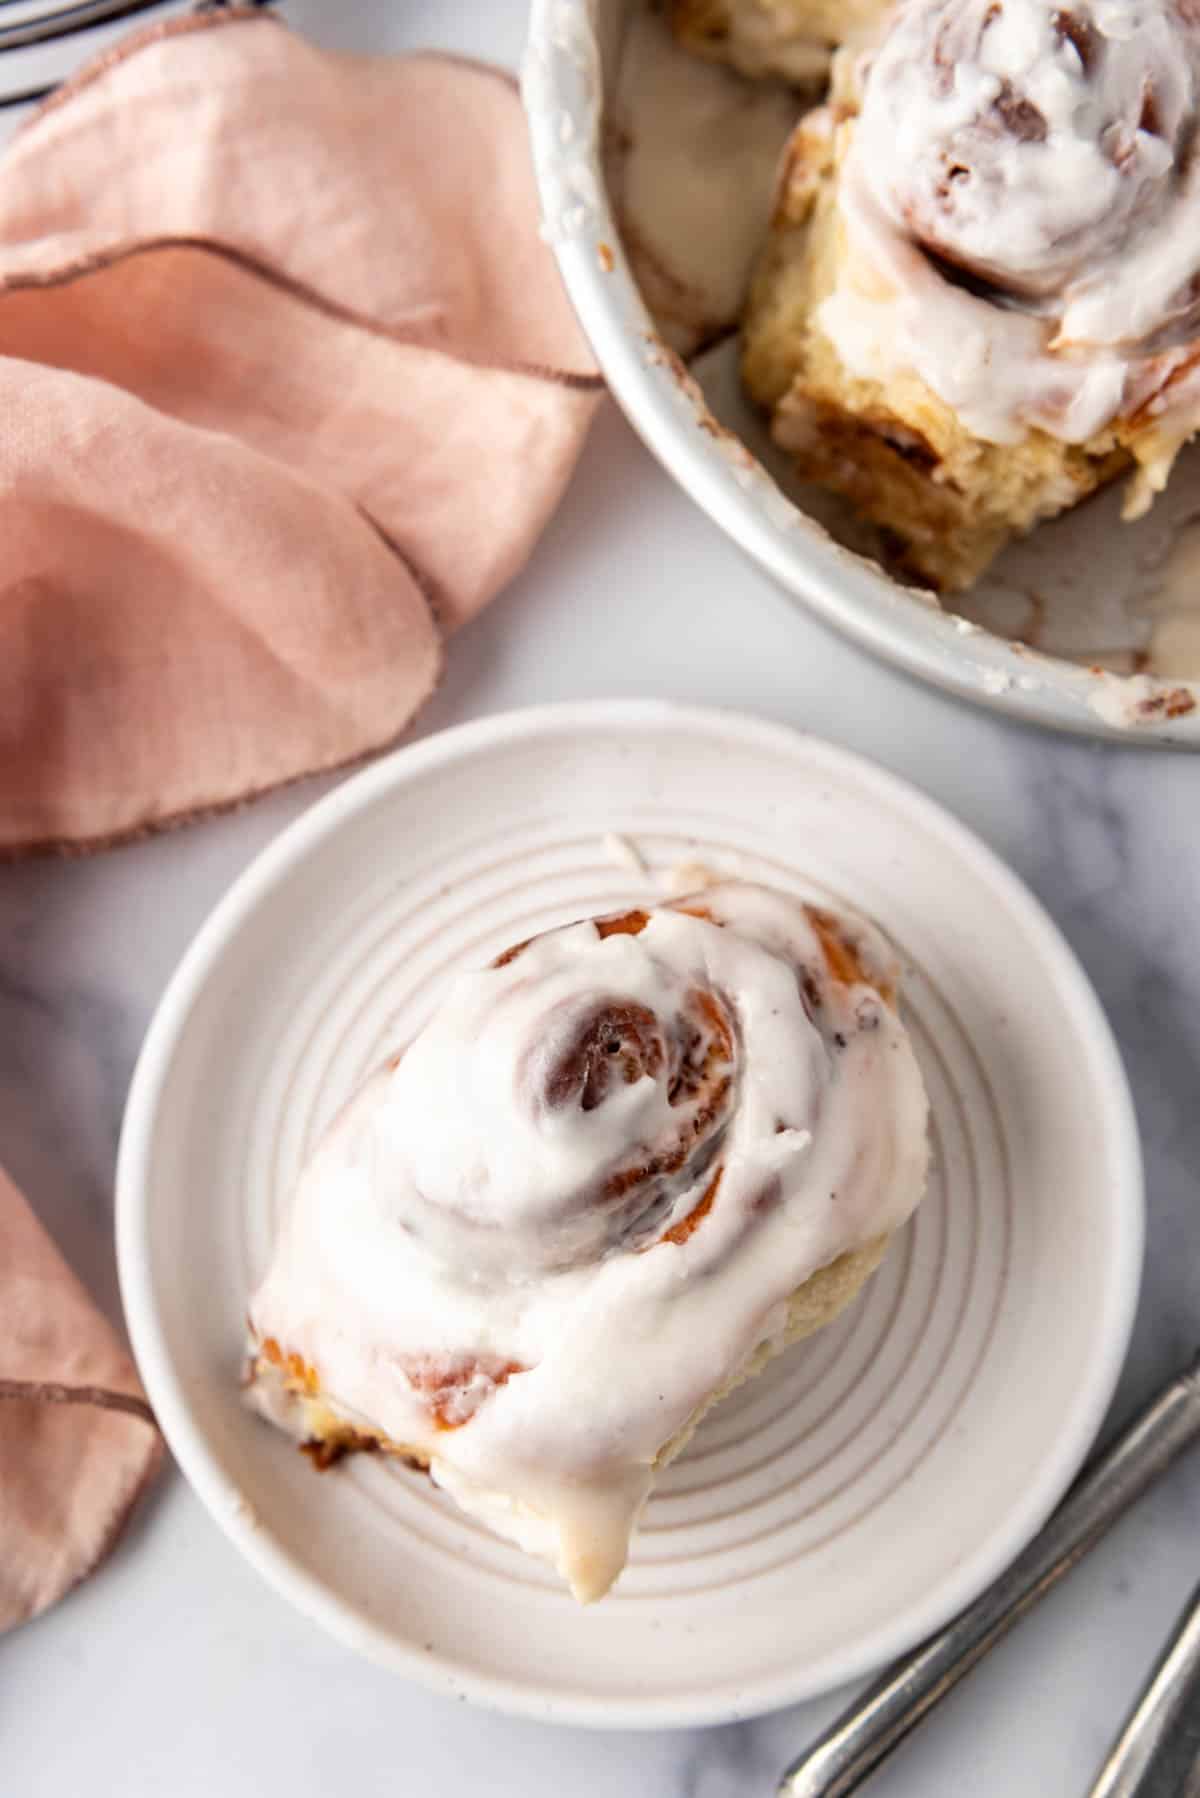 An overhead image of a cinnamon roll on a plate.